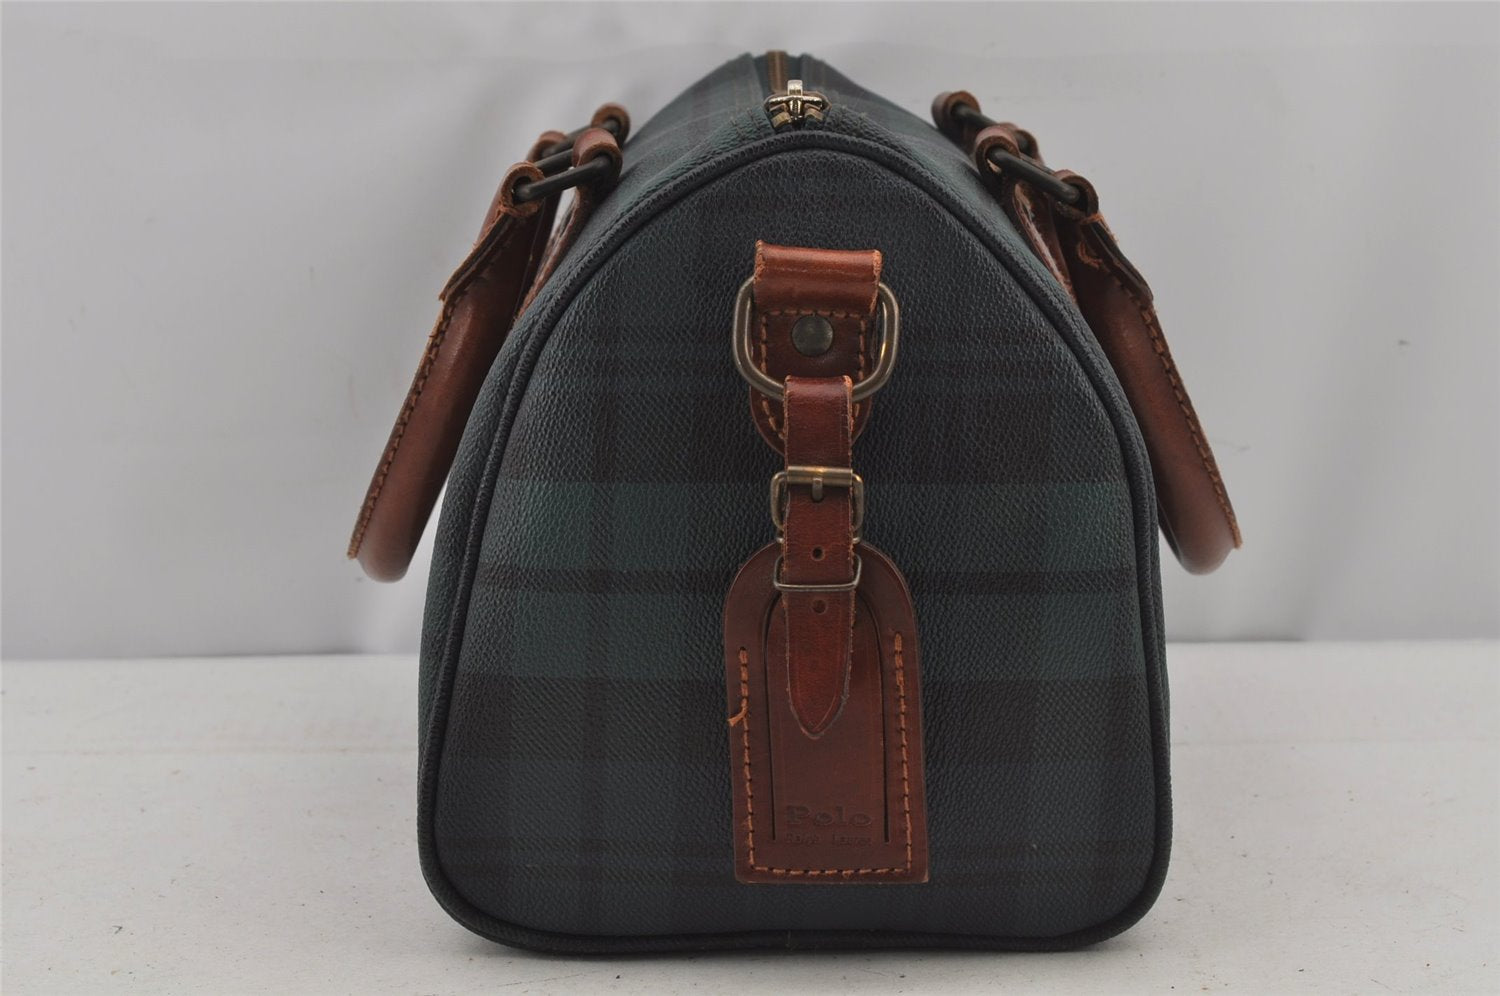 Auth POLO Ralph Lauren Check Pattern PVC Leather 2way Hand Bag Green 6979J